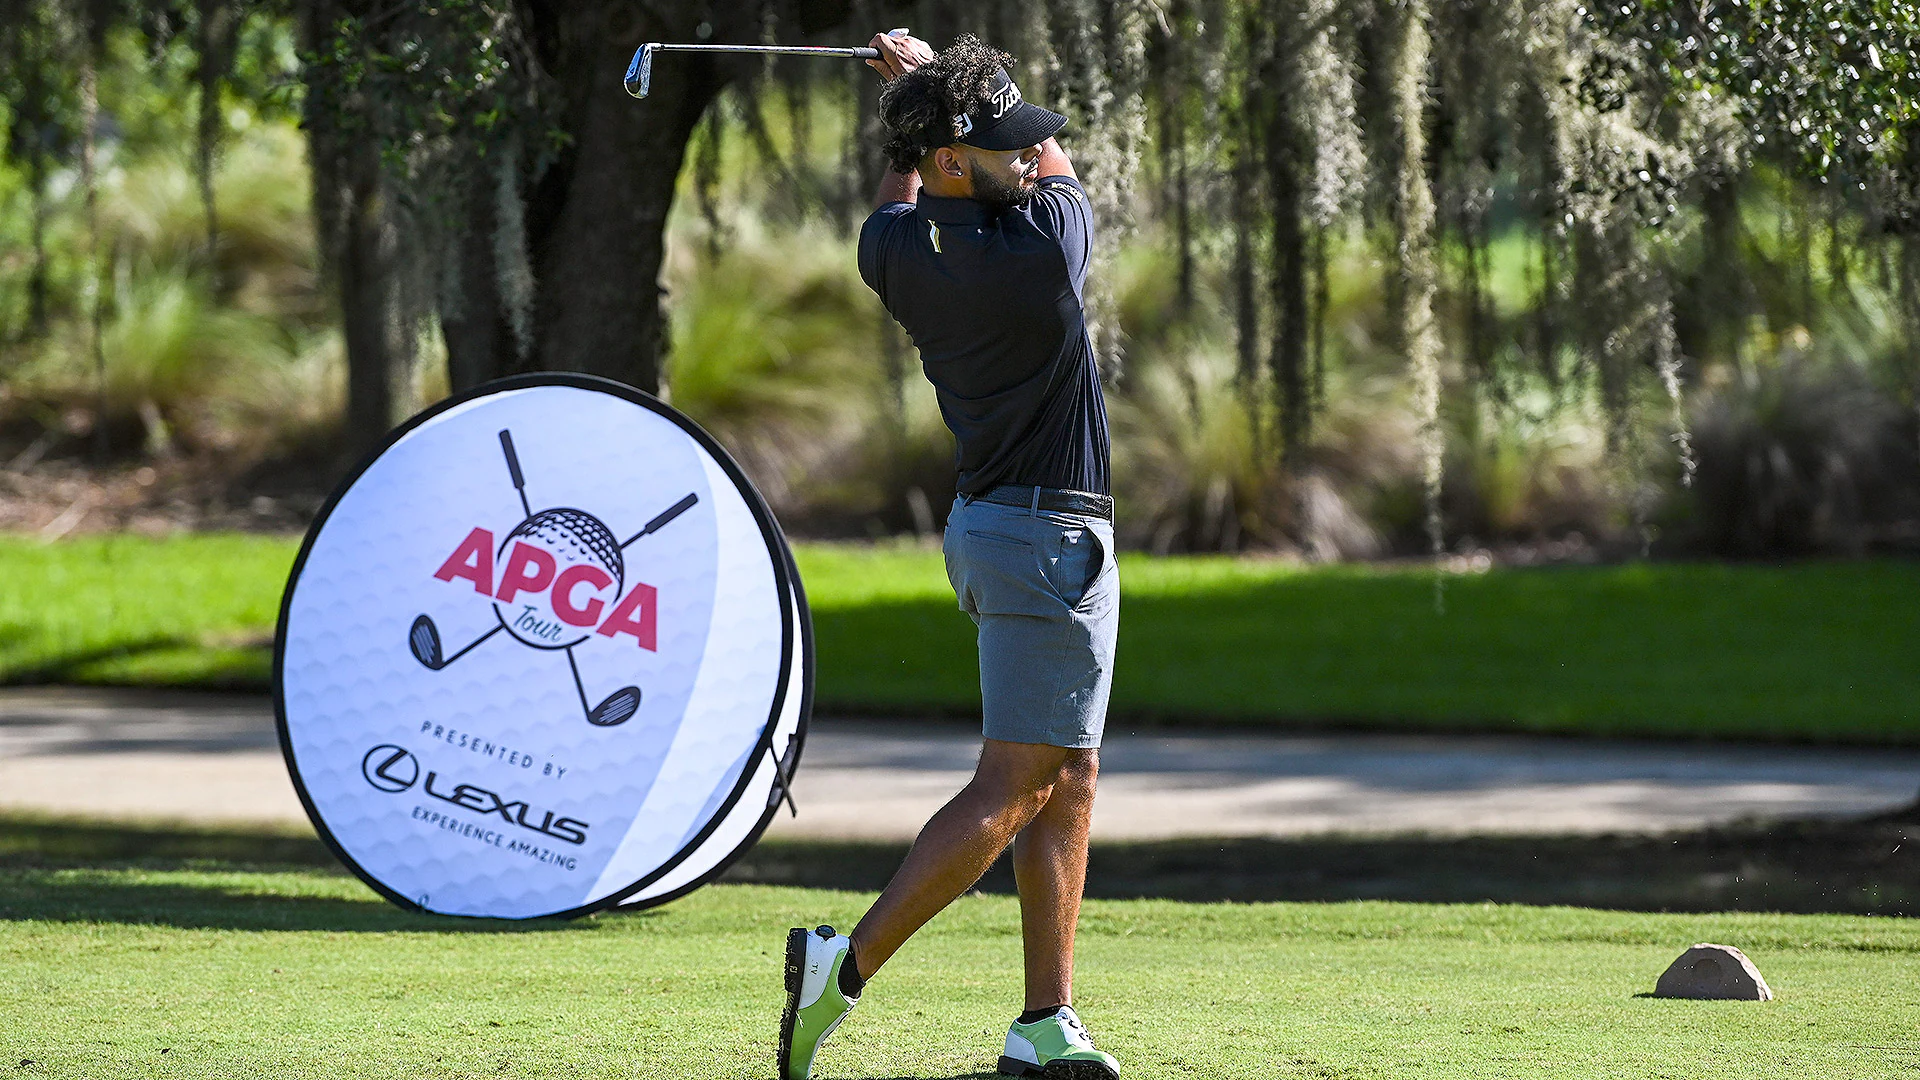 APGA Tour linking with PGA Tour, PGA Tour Champions for events later this year